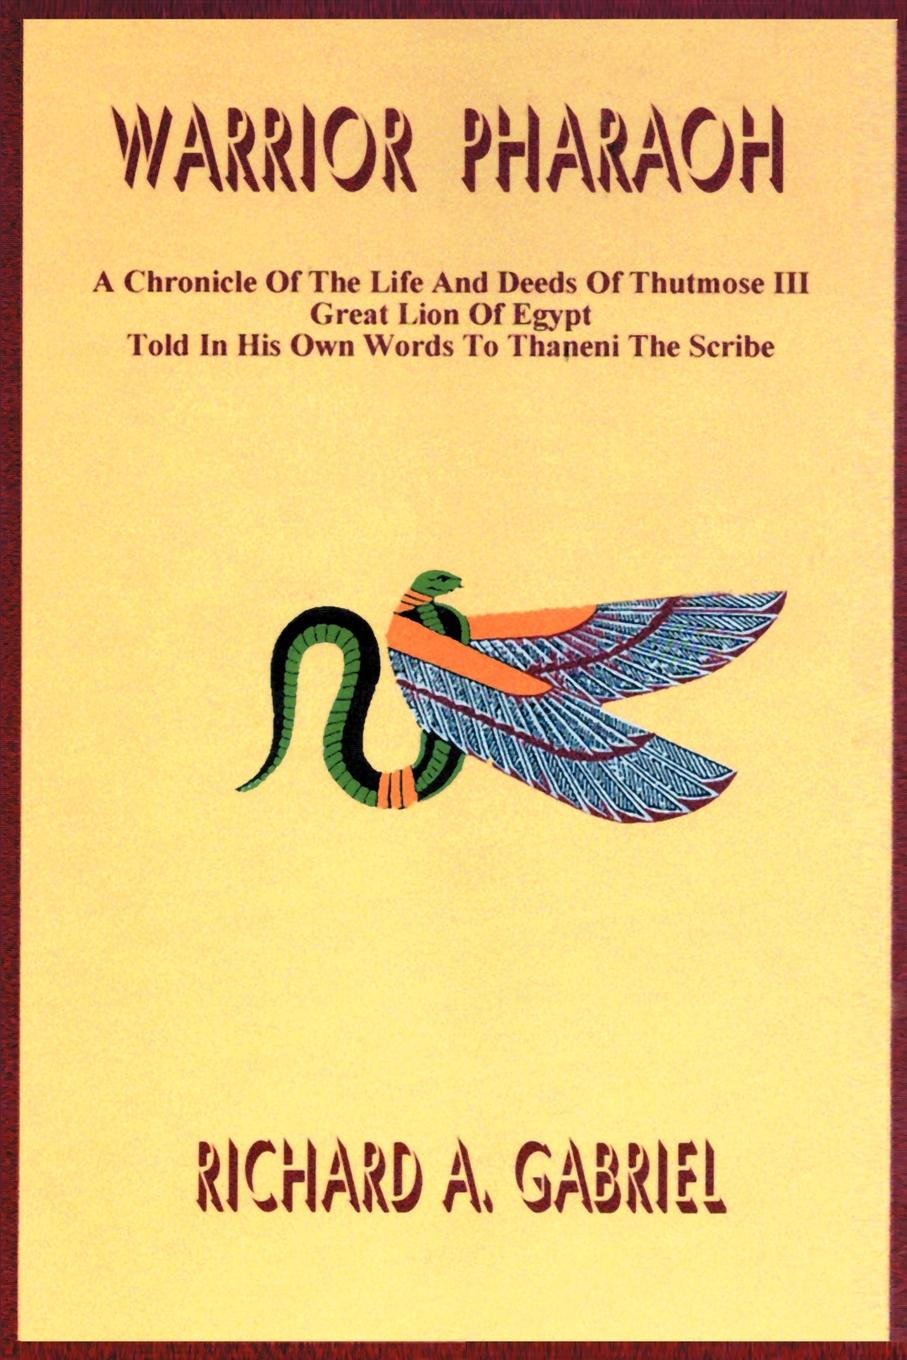 Warrior Pharaoh. A Chronicle of the Life and Deeds of Thutmose III, Great Lion of Egypt, Told in His Own Words to Thaneni the Scribe